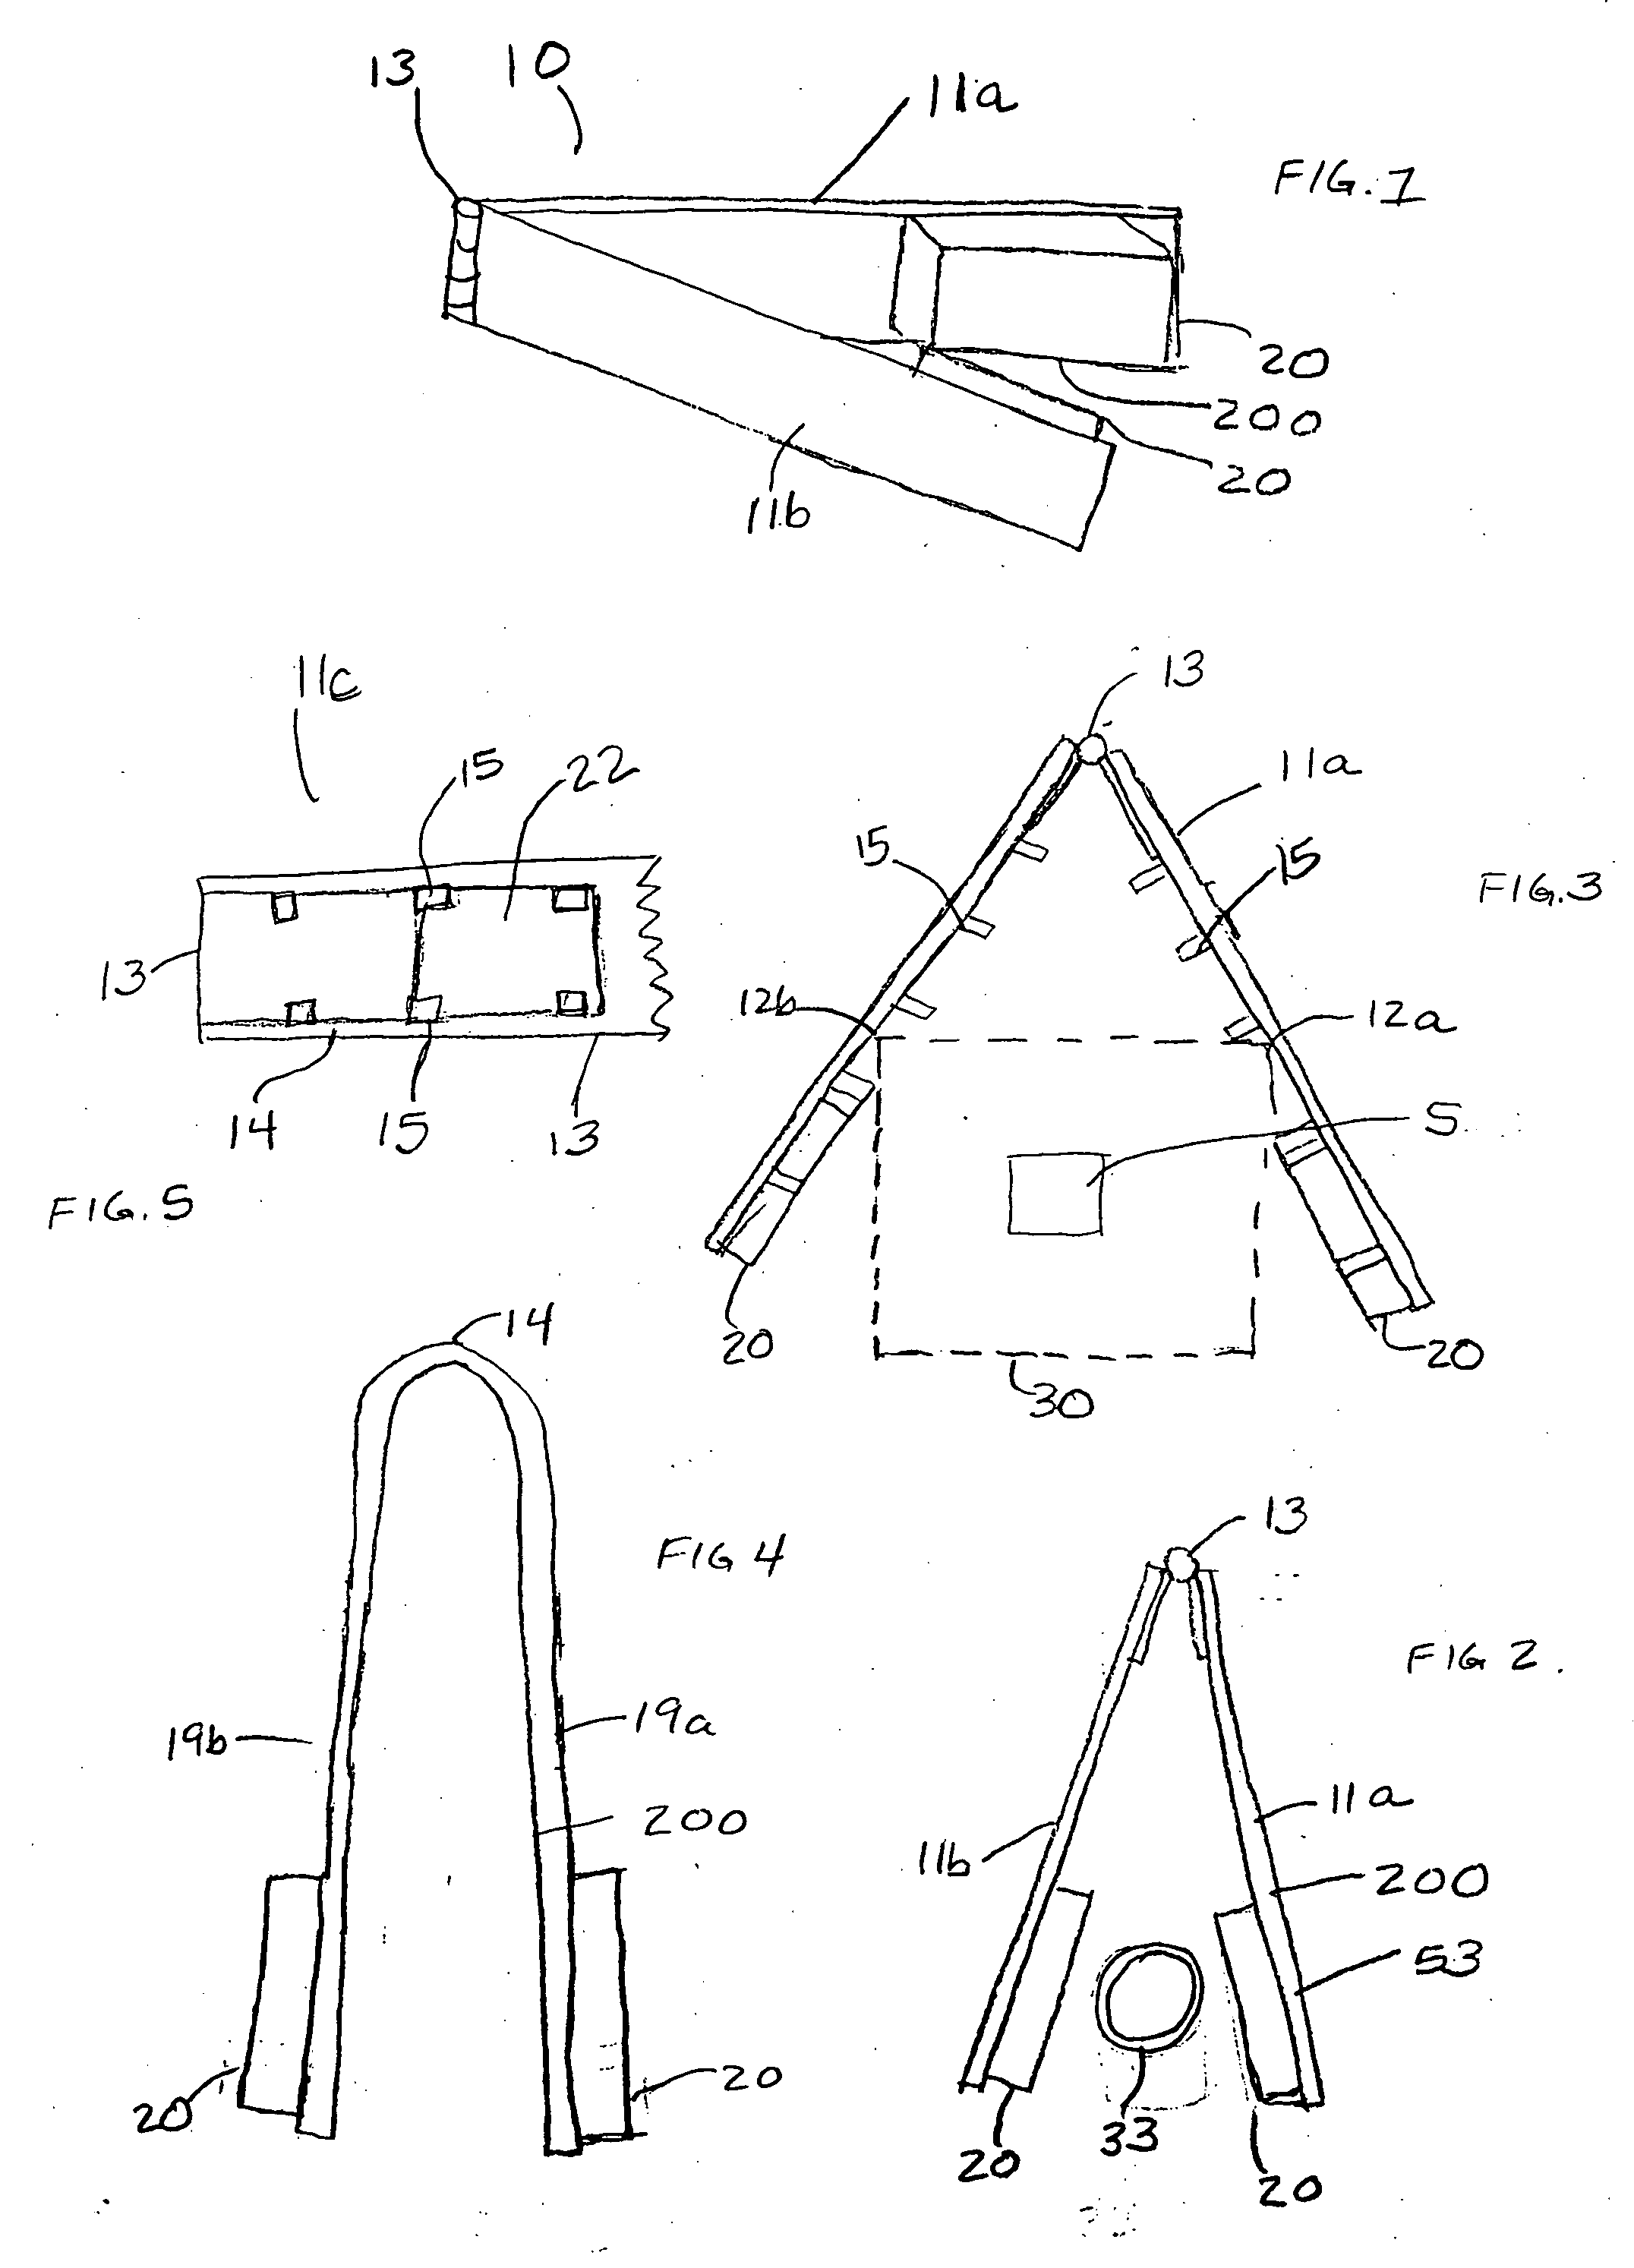 Device and method for increasing viability in cell types